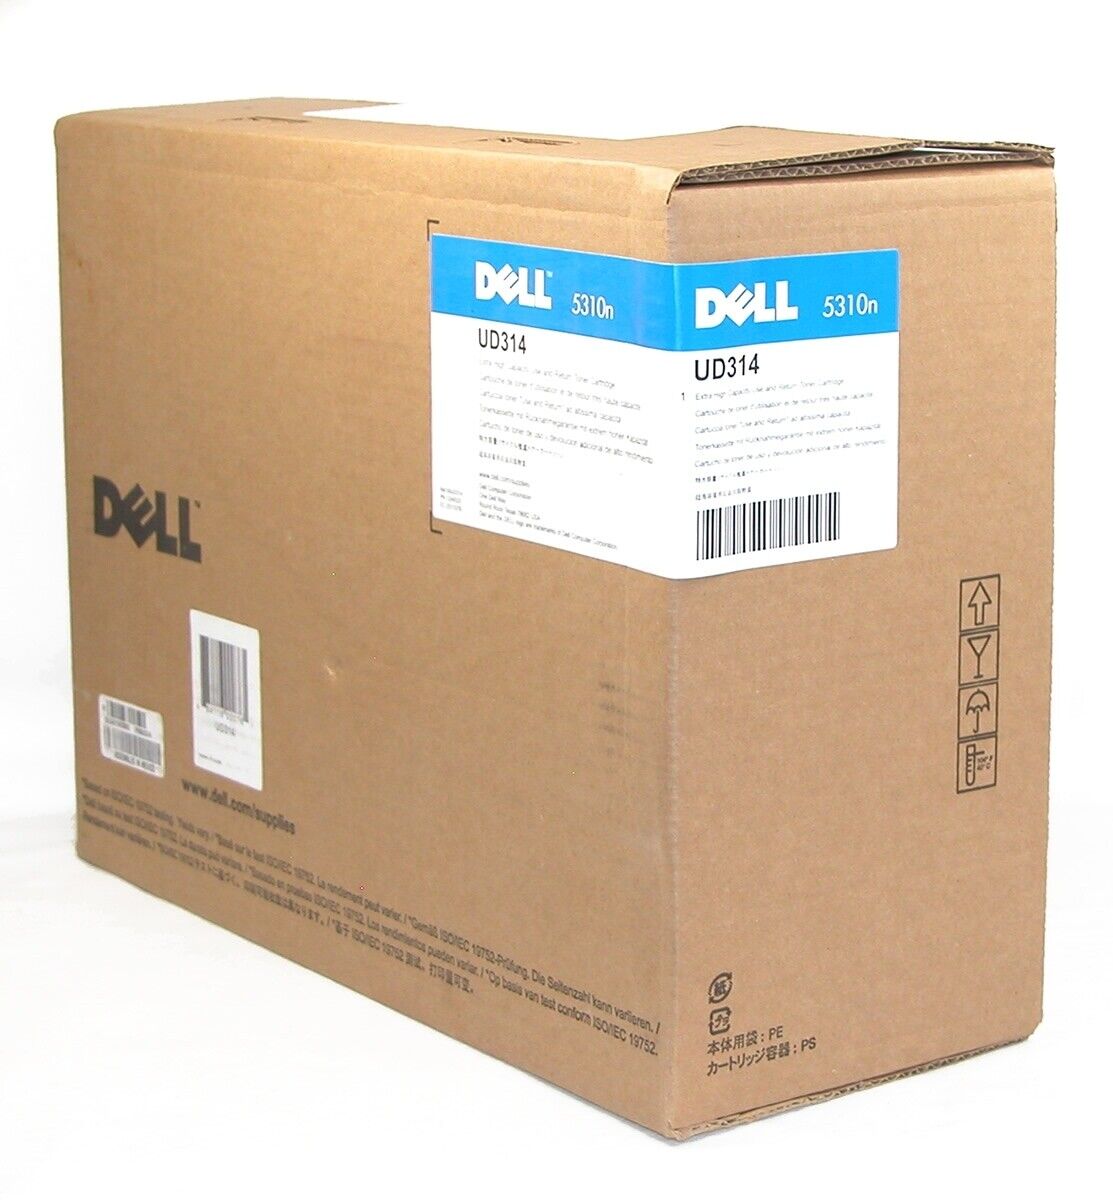 NEW SEALED Dell UD314 5310N BLACK Toner Cartridge Extra High Yield 30K PG